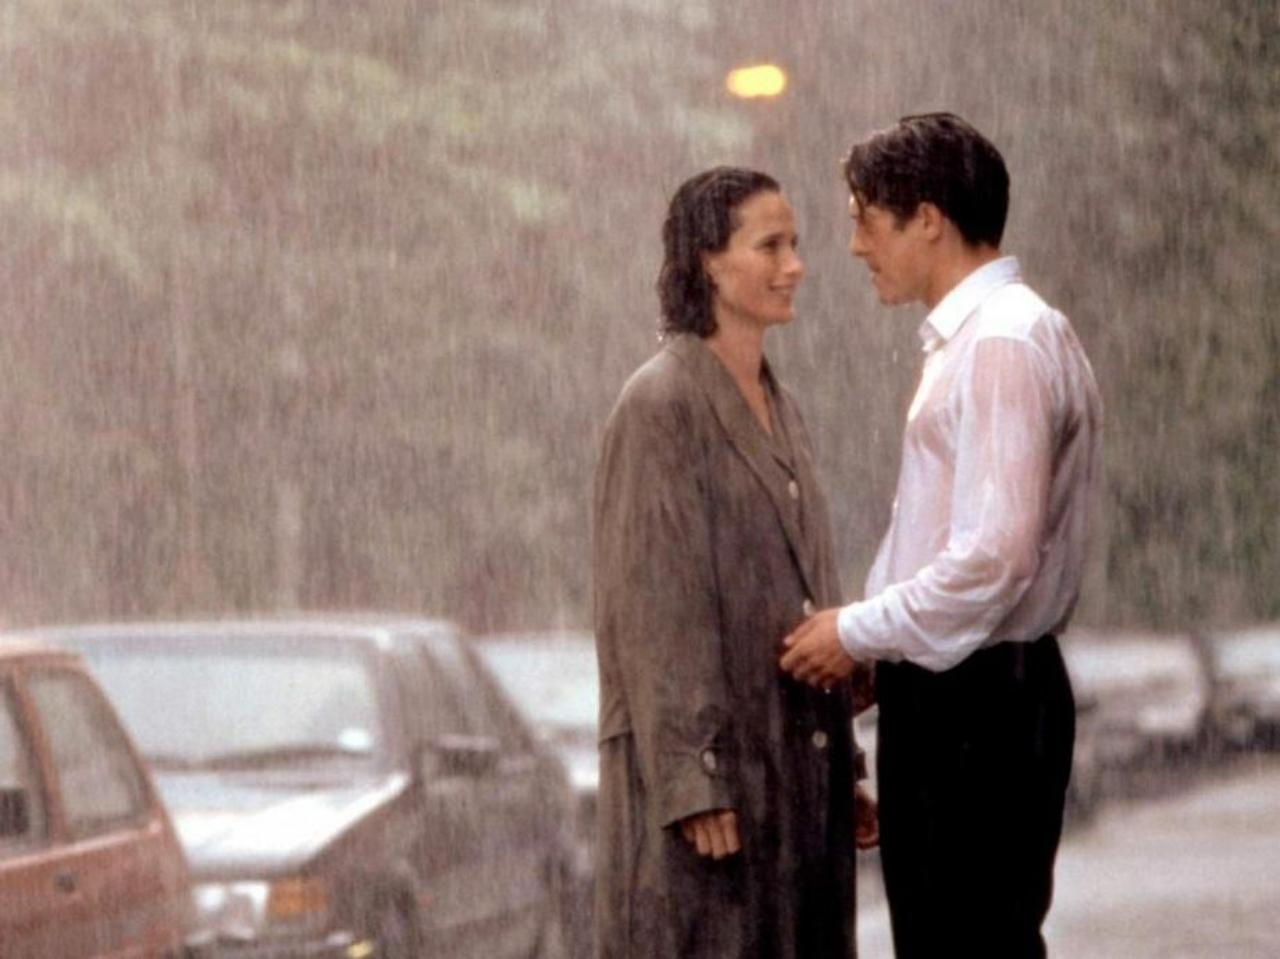 Four Weddings and a Funeral
The beloved British film, Four Weddings and a Funeral, reaches its climax as Andie MacDowell and Hugh Grant's characters break free from their mismatched partners and confess their love for one another. This heartwarming moment serves as a memorable conclusion to the movie. And it takes place in...you guessed it, the rain! Well come on, it's England